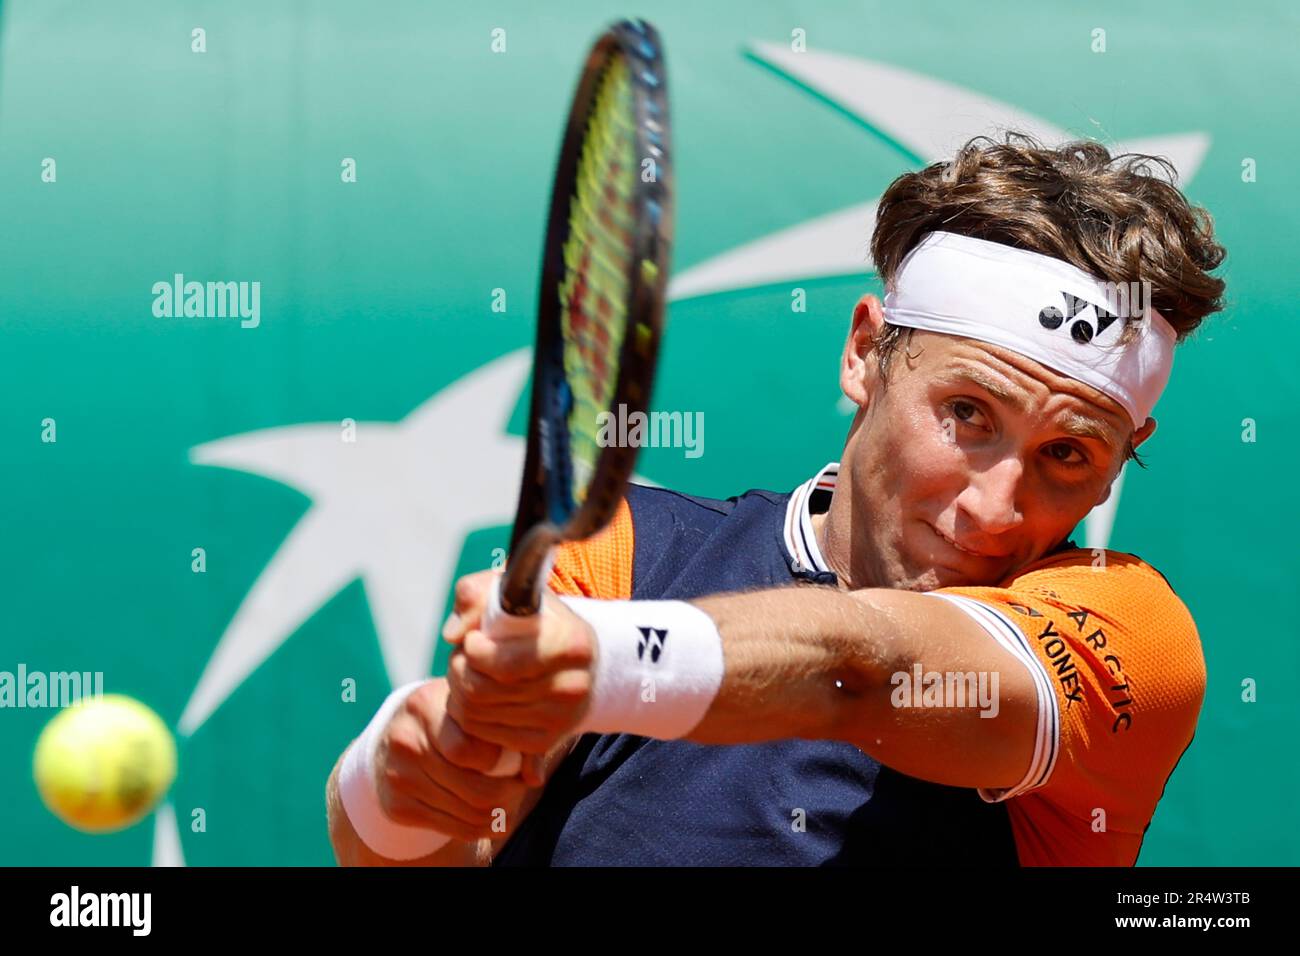 Norways Casper Ruud plays a shot against Swedens Elias Ymer during their first round match of the French Open tennis tournament at the Roland Garros stadium in Paris, Tuesday, May 30, 2023